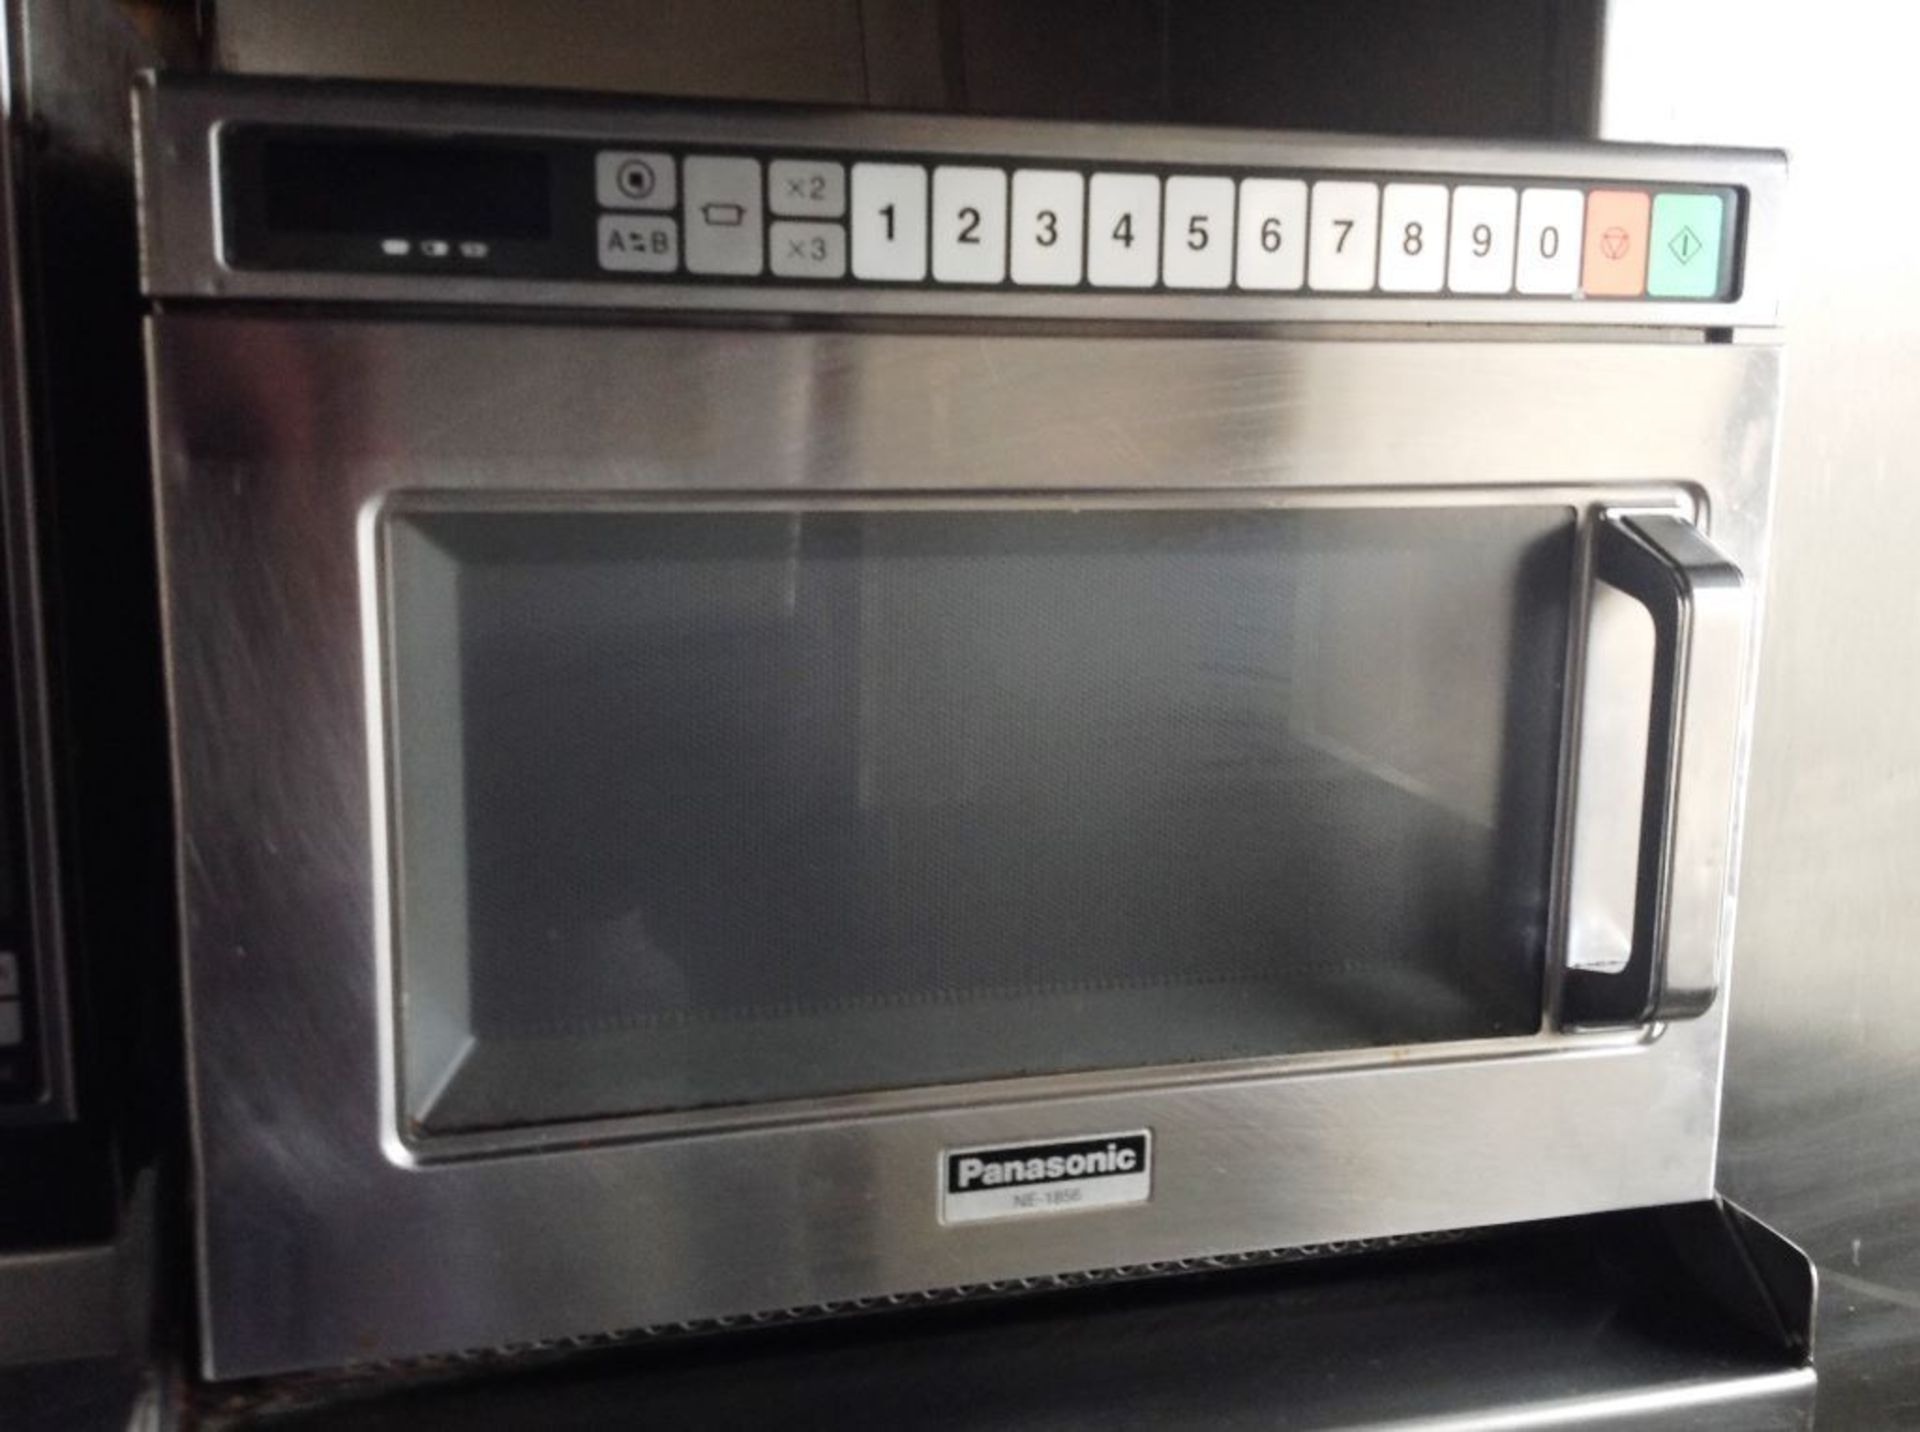 Panasonic NE-1856 commercial microwave 1800W 17.9 litre capacity chamber 20 programs to include 2